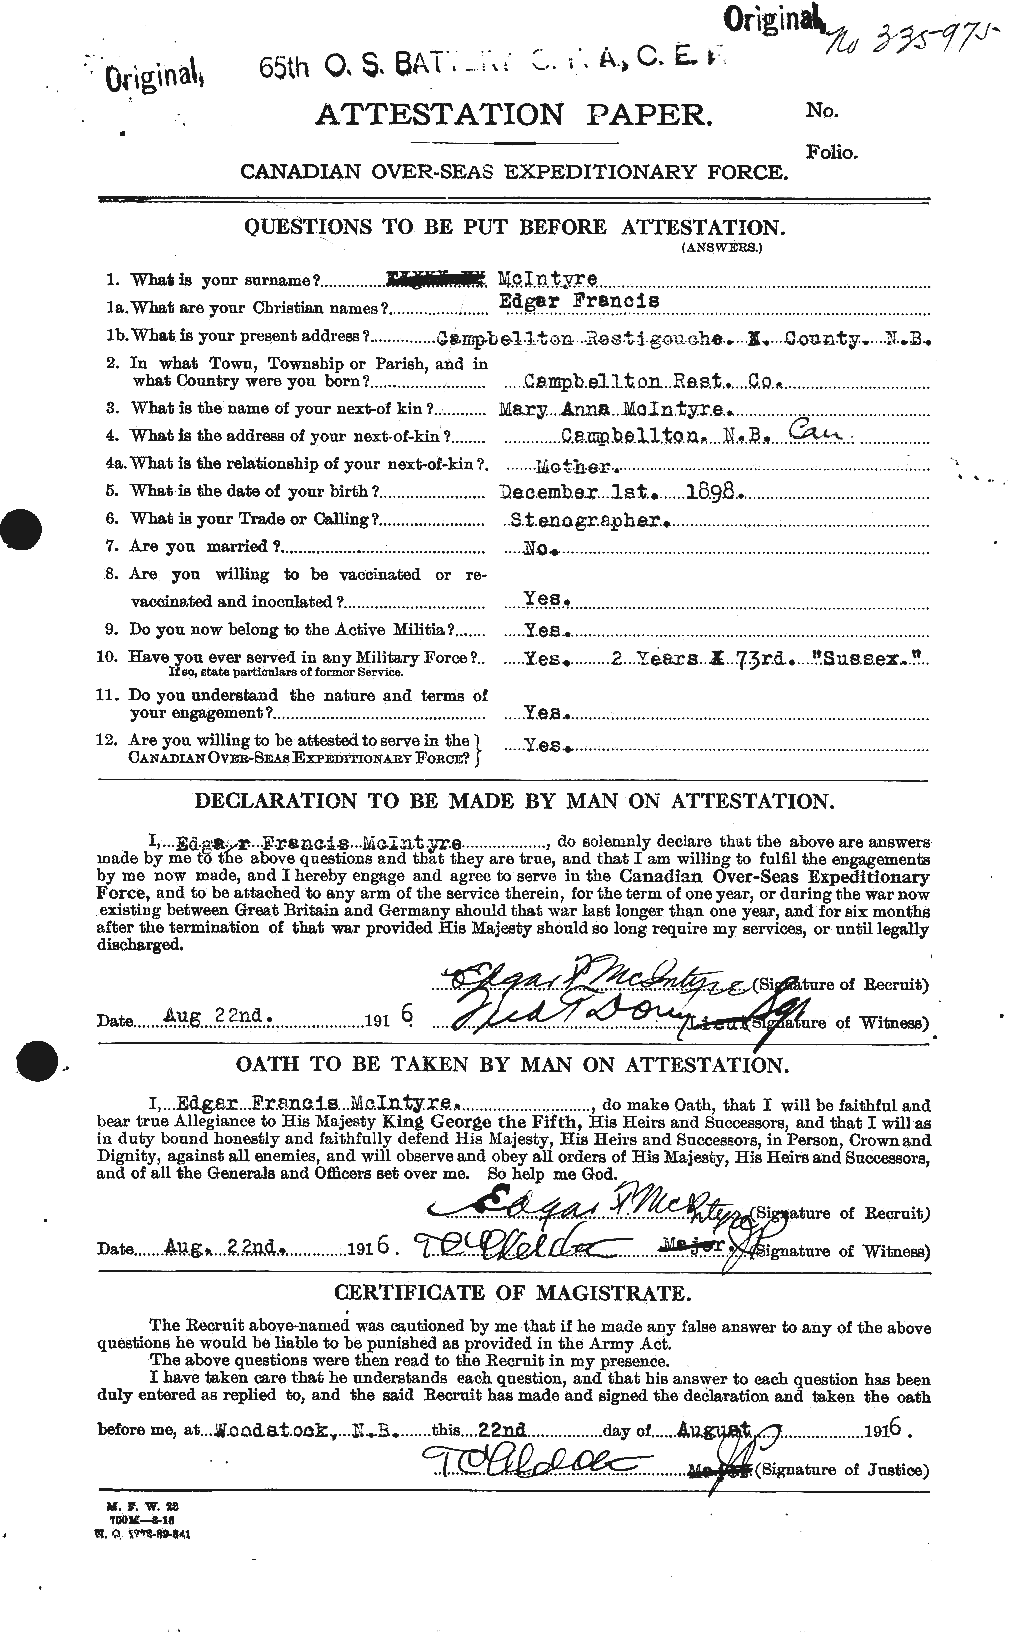 Personnel Records of the First World War - CEF 527348a